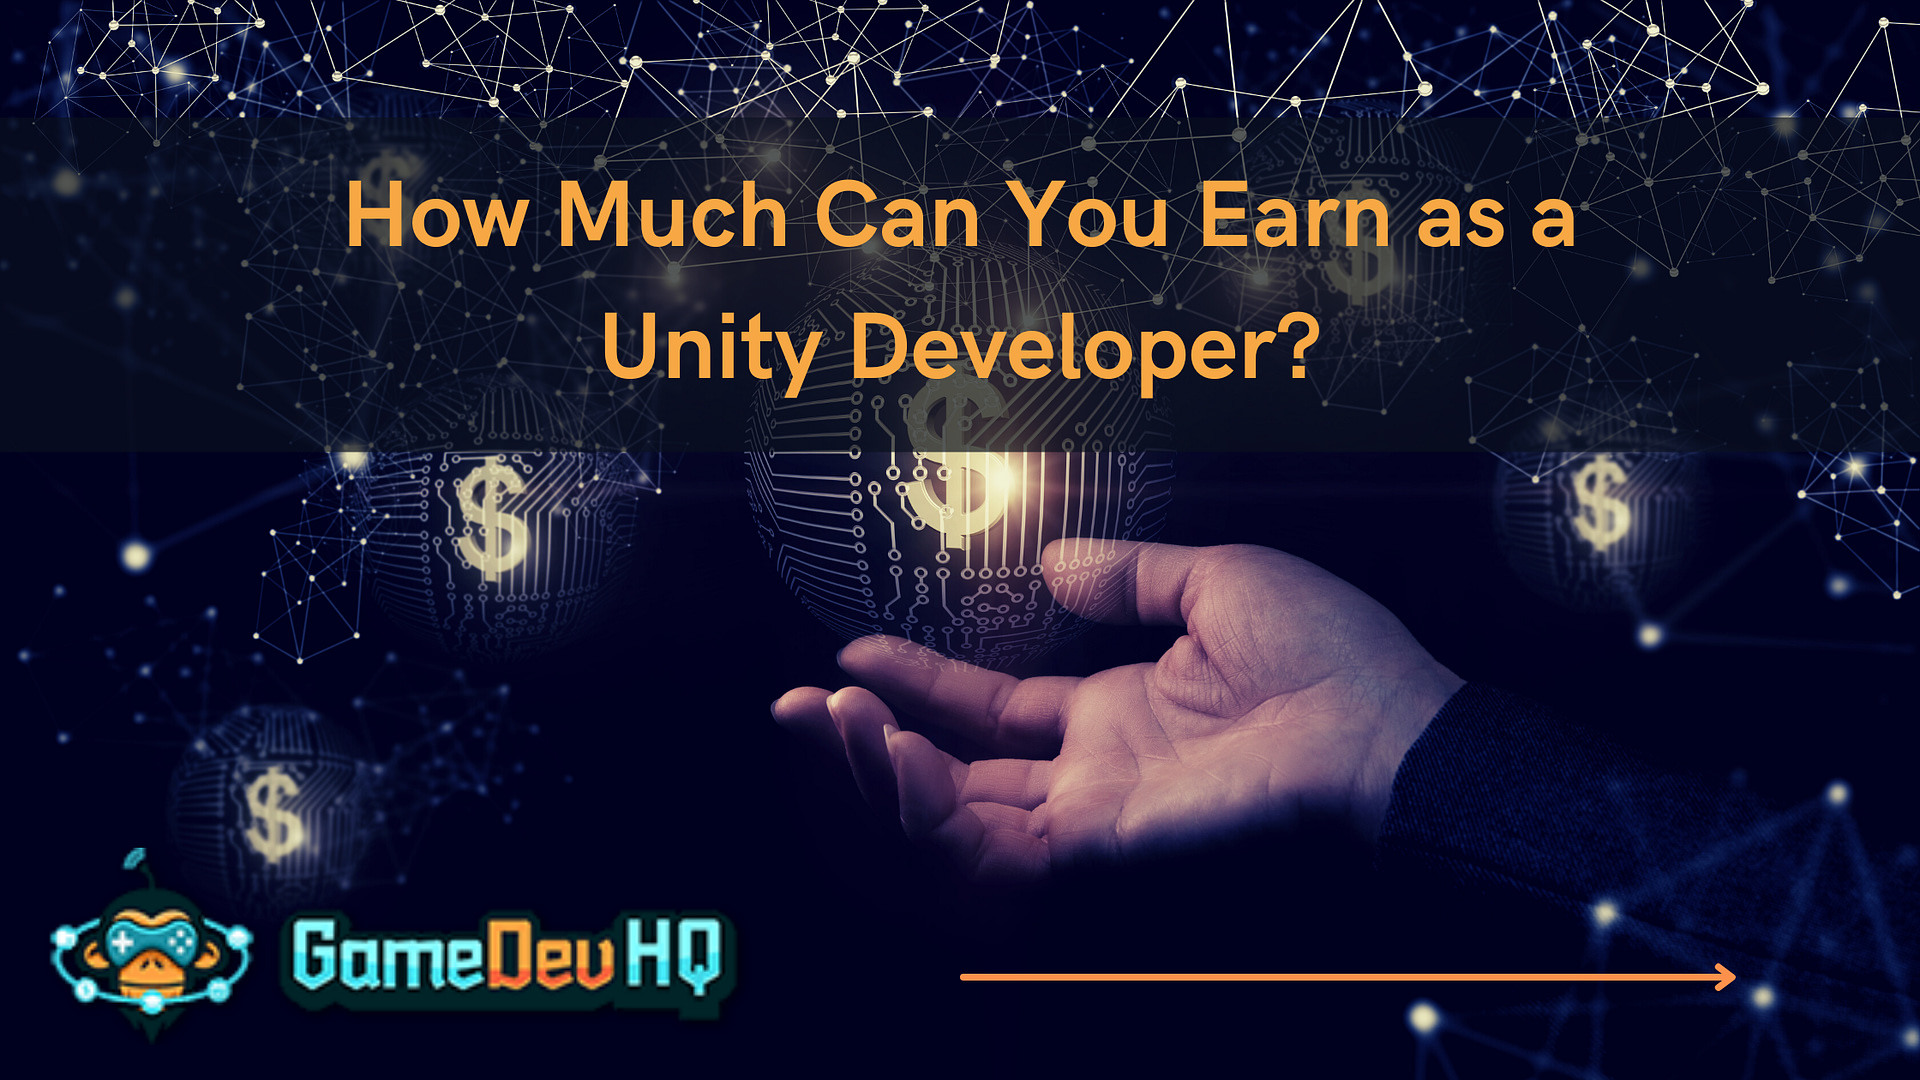 How Much Can You Earn as a Unity Developer?